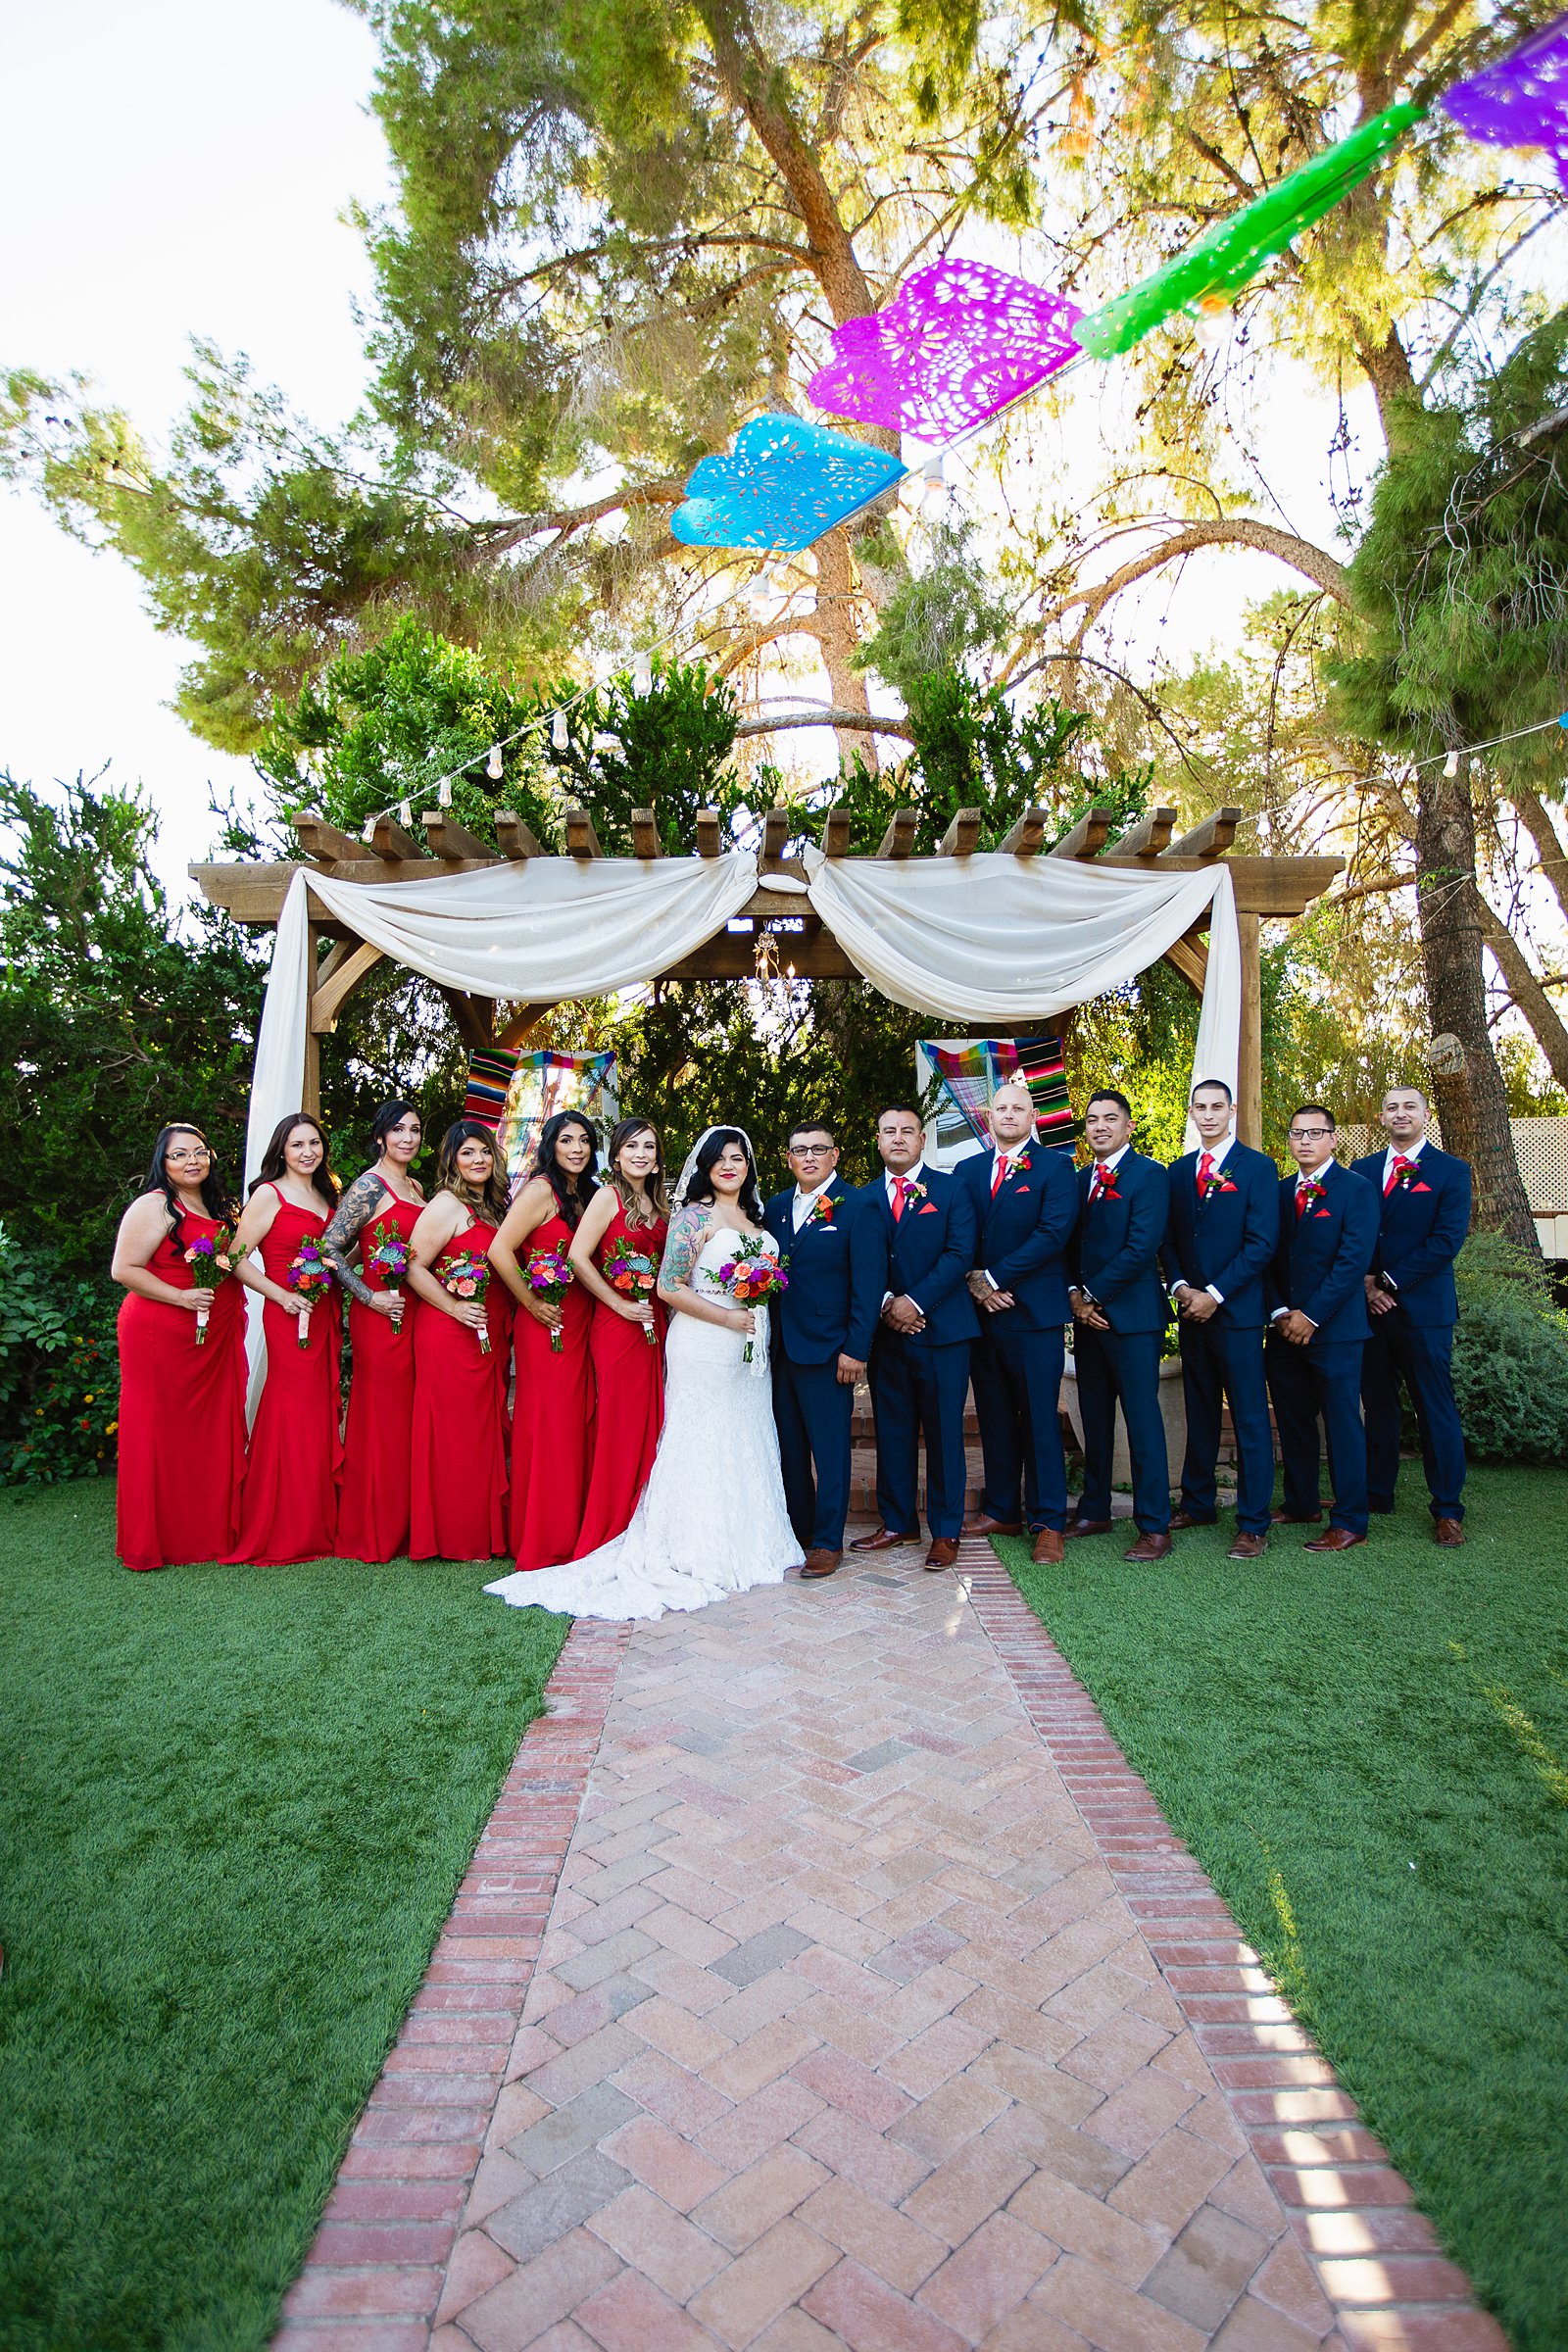 Bridal party together at a The Farmhouse at Schnepf Farms wedding by Arizona wedding photographer PMA Photography.